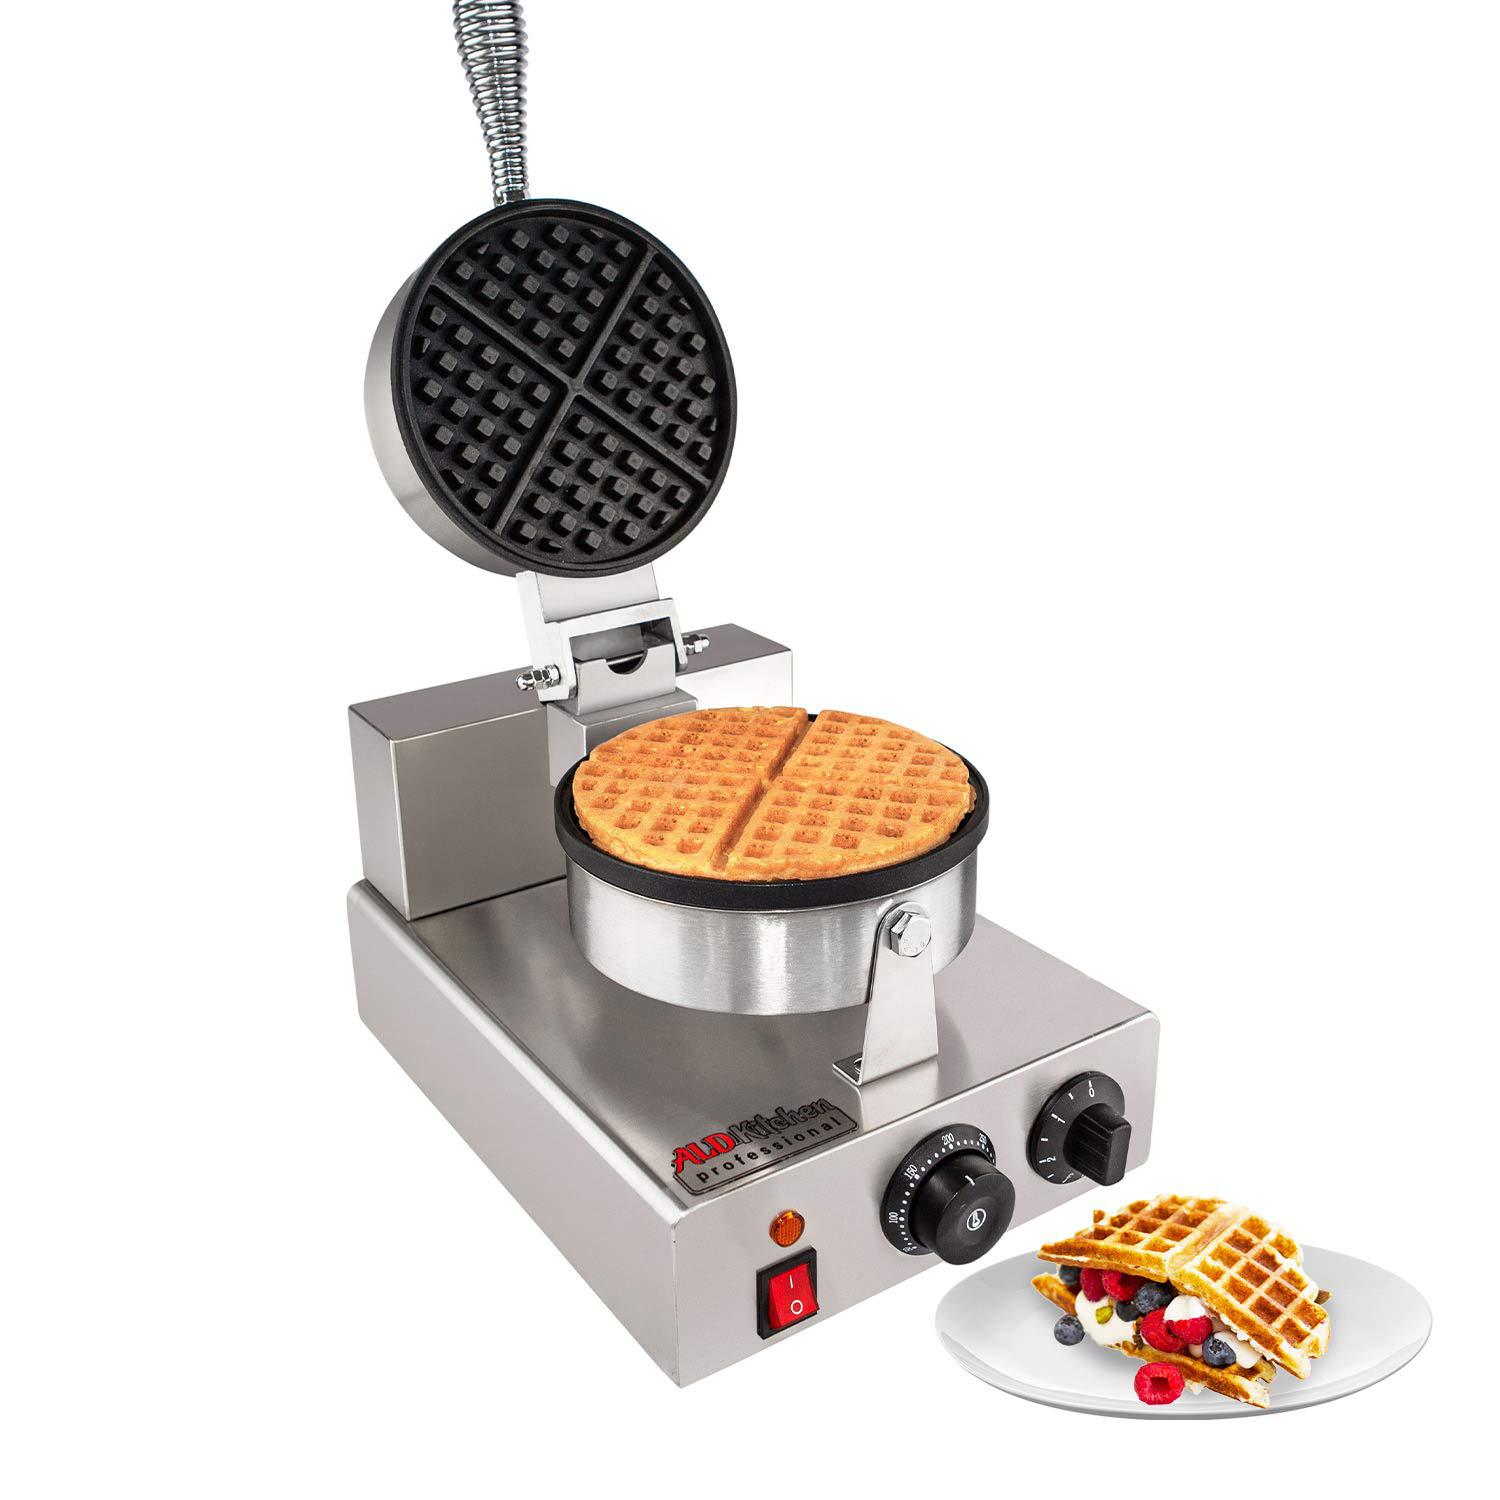 Ixaer 110v electric waffle maker waffle stainless steel machine temperature and time control egg bubble waffle maker easy clean non